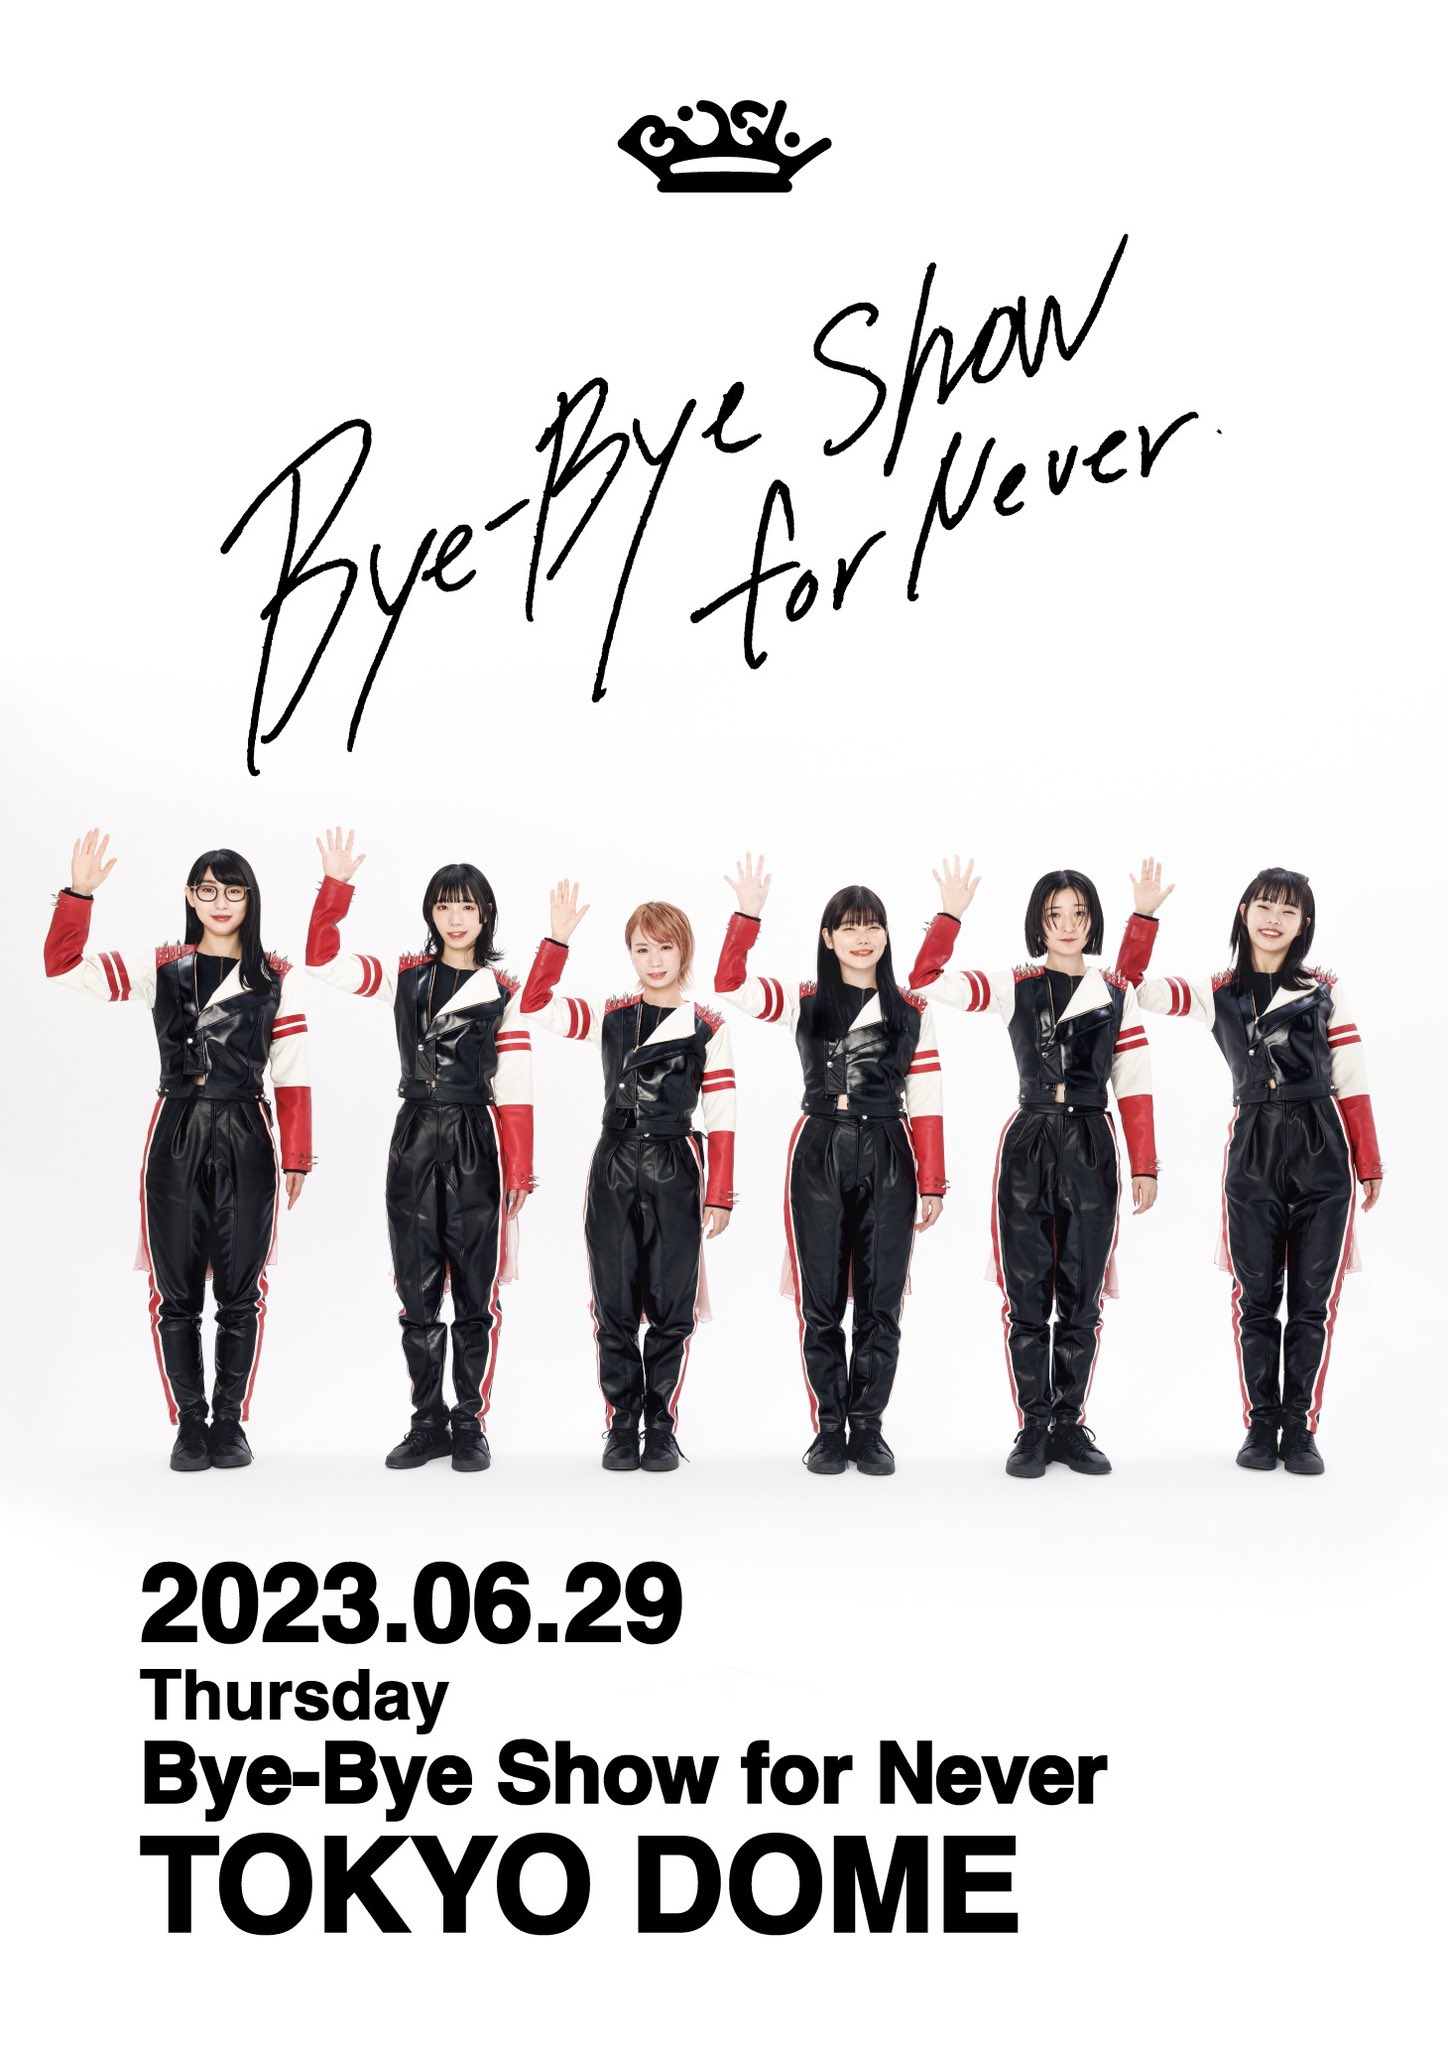 BiSH／Bye-Bye Show for Never at TOKYO DOME（初回生産限定盤） [Blu 